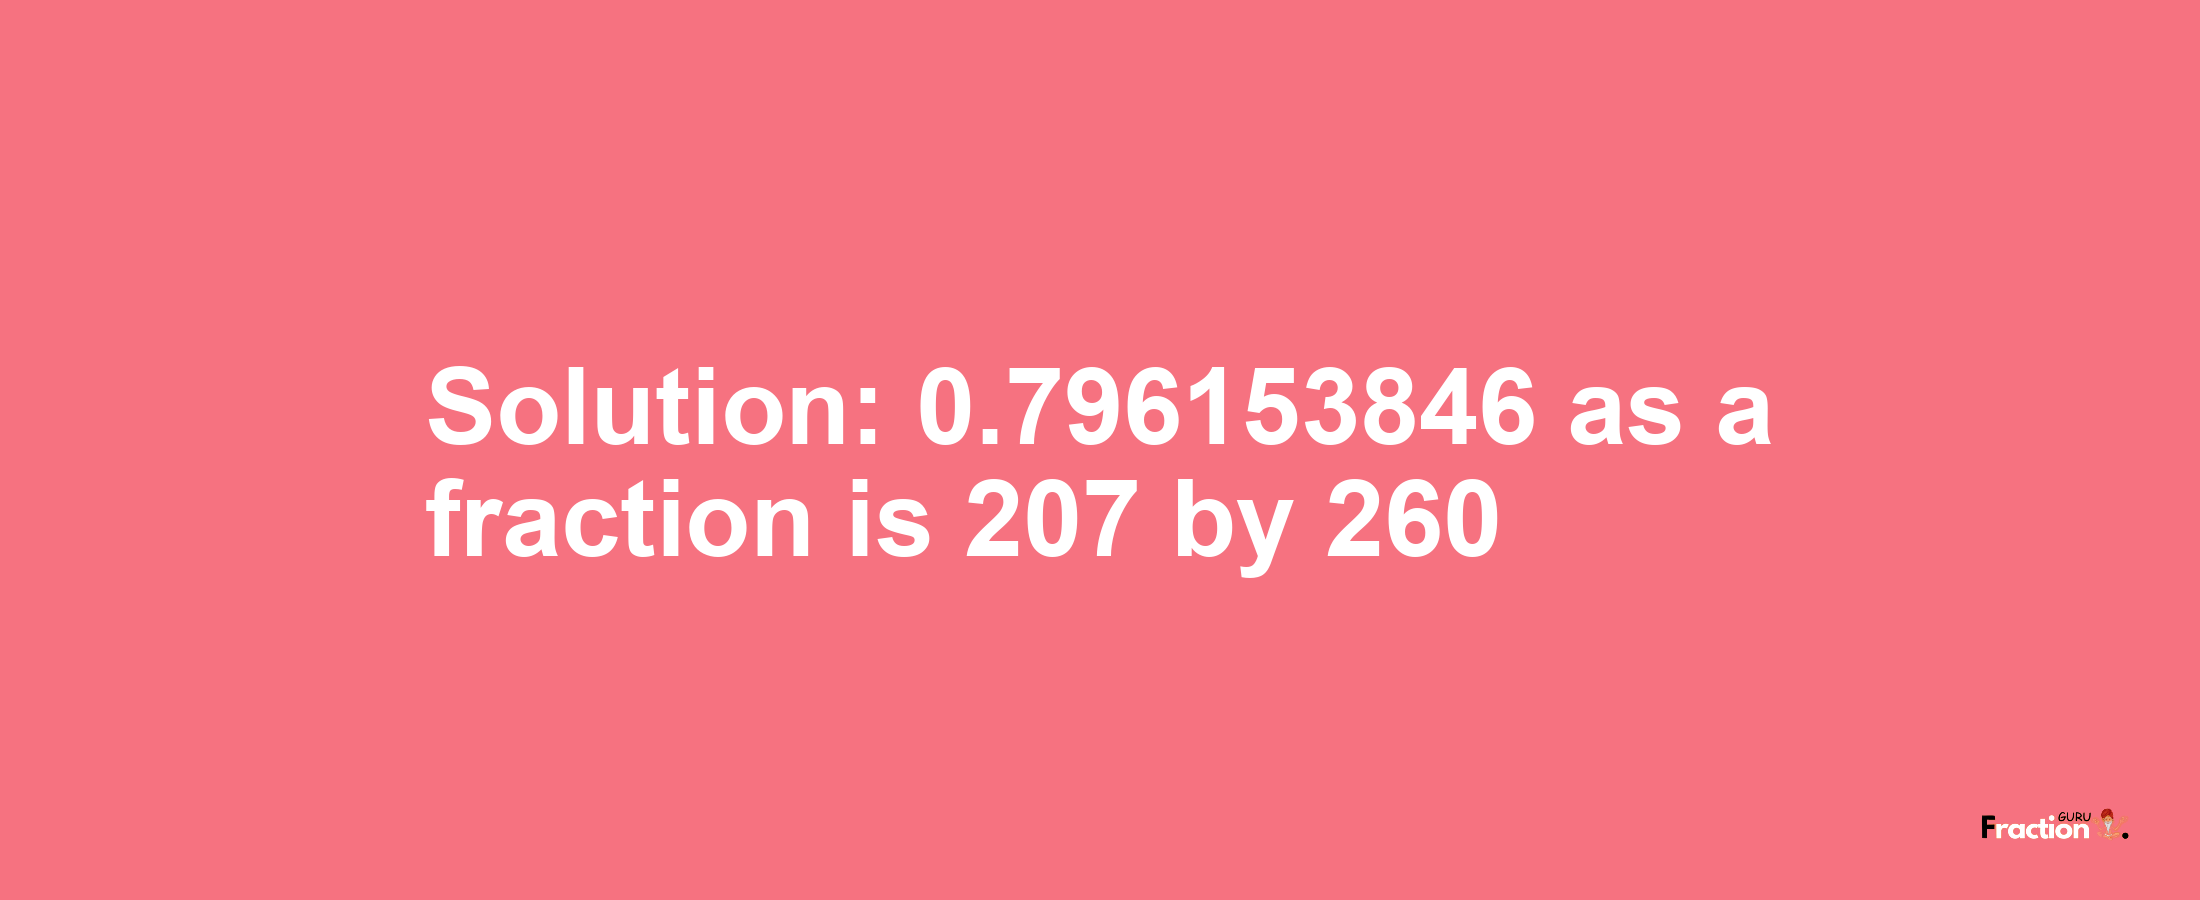 Solution:0.796153846 as a fraction is 207/260